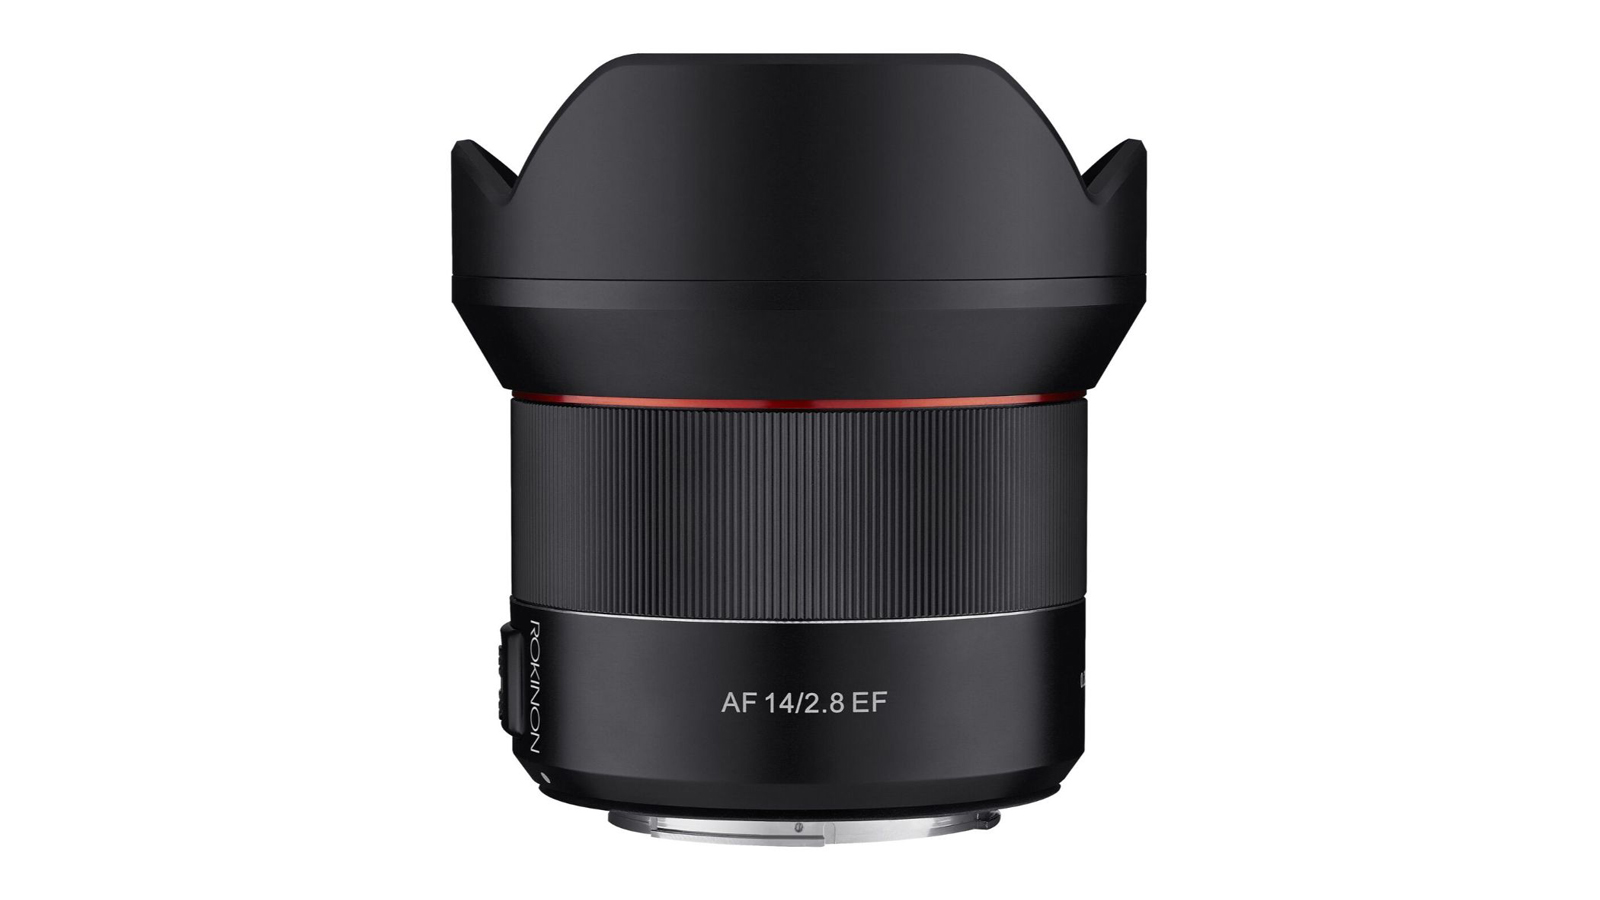 Save $200% on the Samyang Auto Focus f/2.8 14mm Lens: a great wide